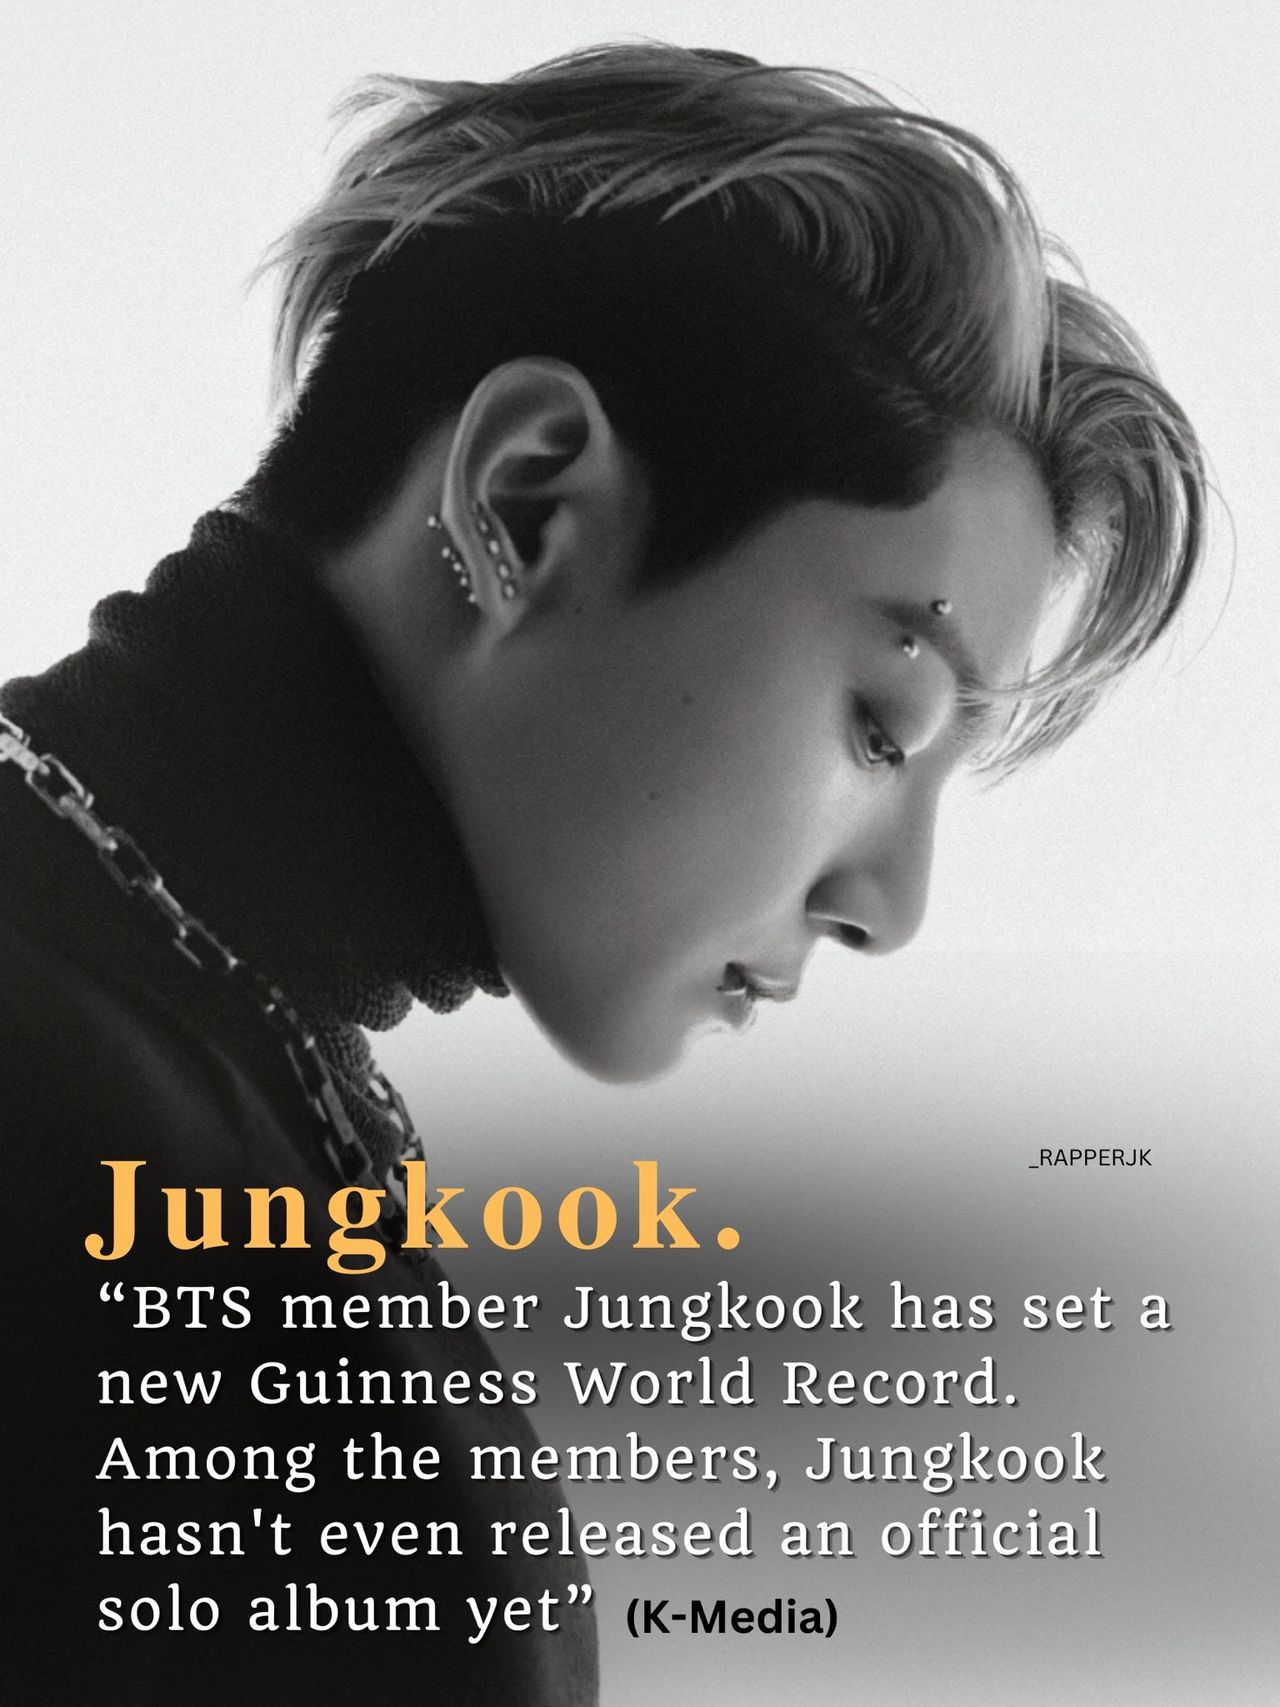 Today's K-pop] BTS' Jungkook sets Guinness record with Spotify streams